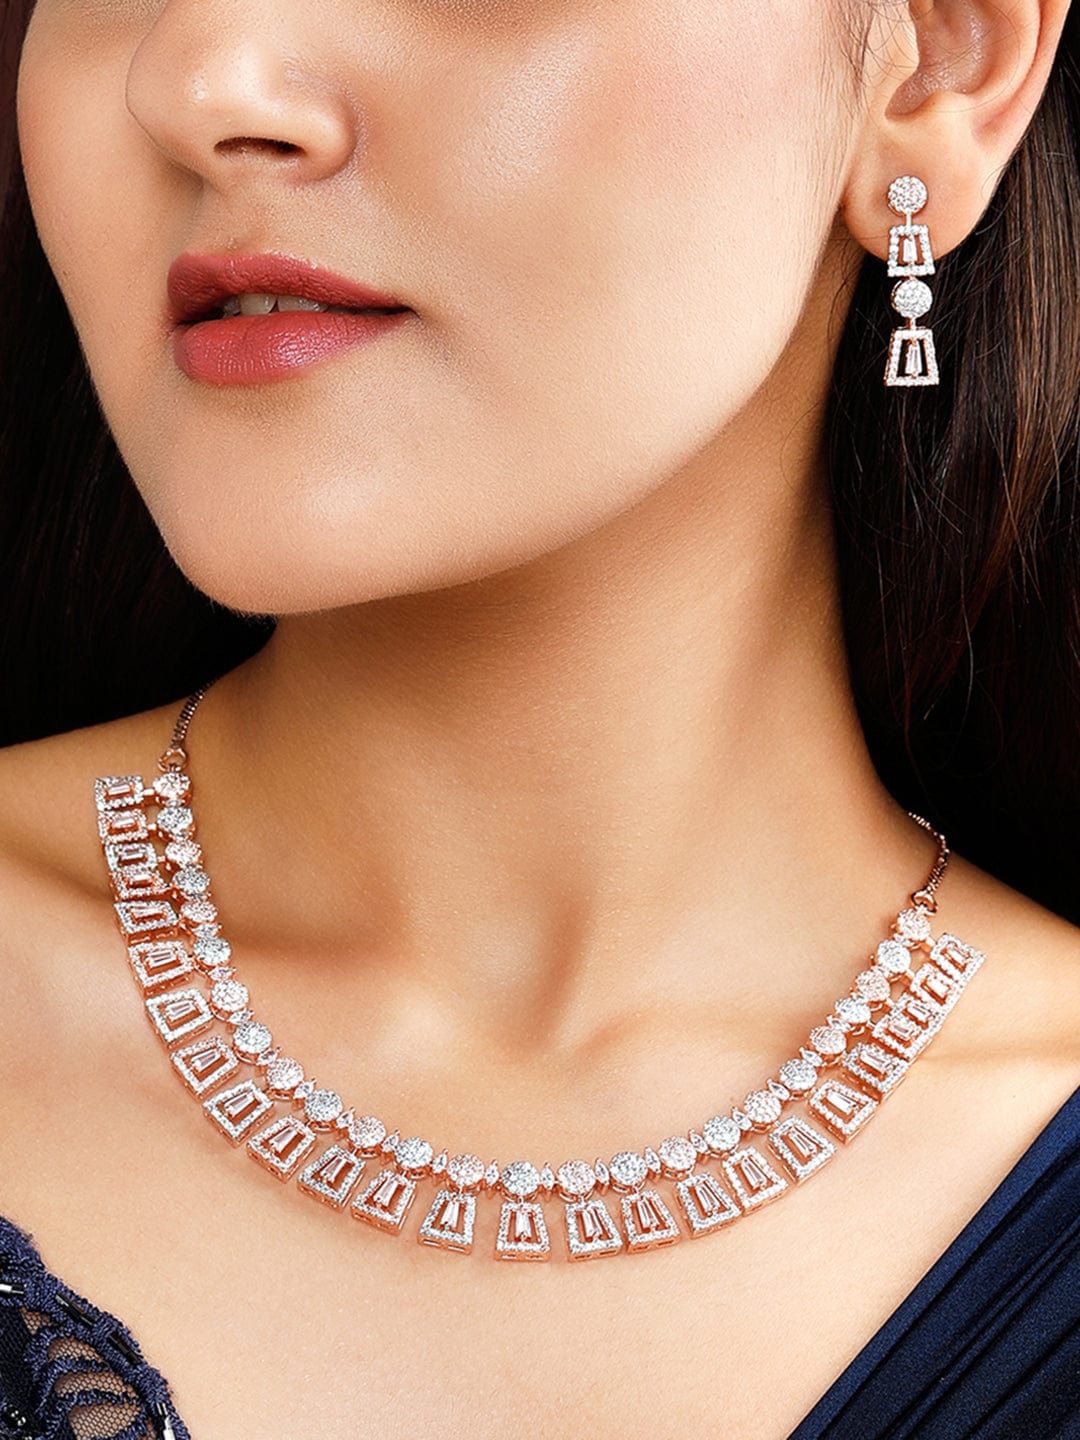 Rubans Rose Gold-Plated Necklace Set With American Diamonds. Necklace Set